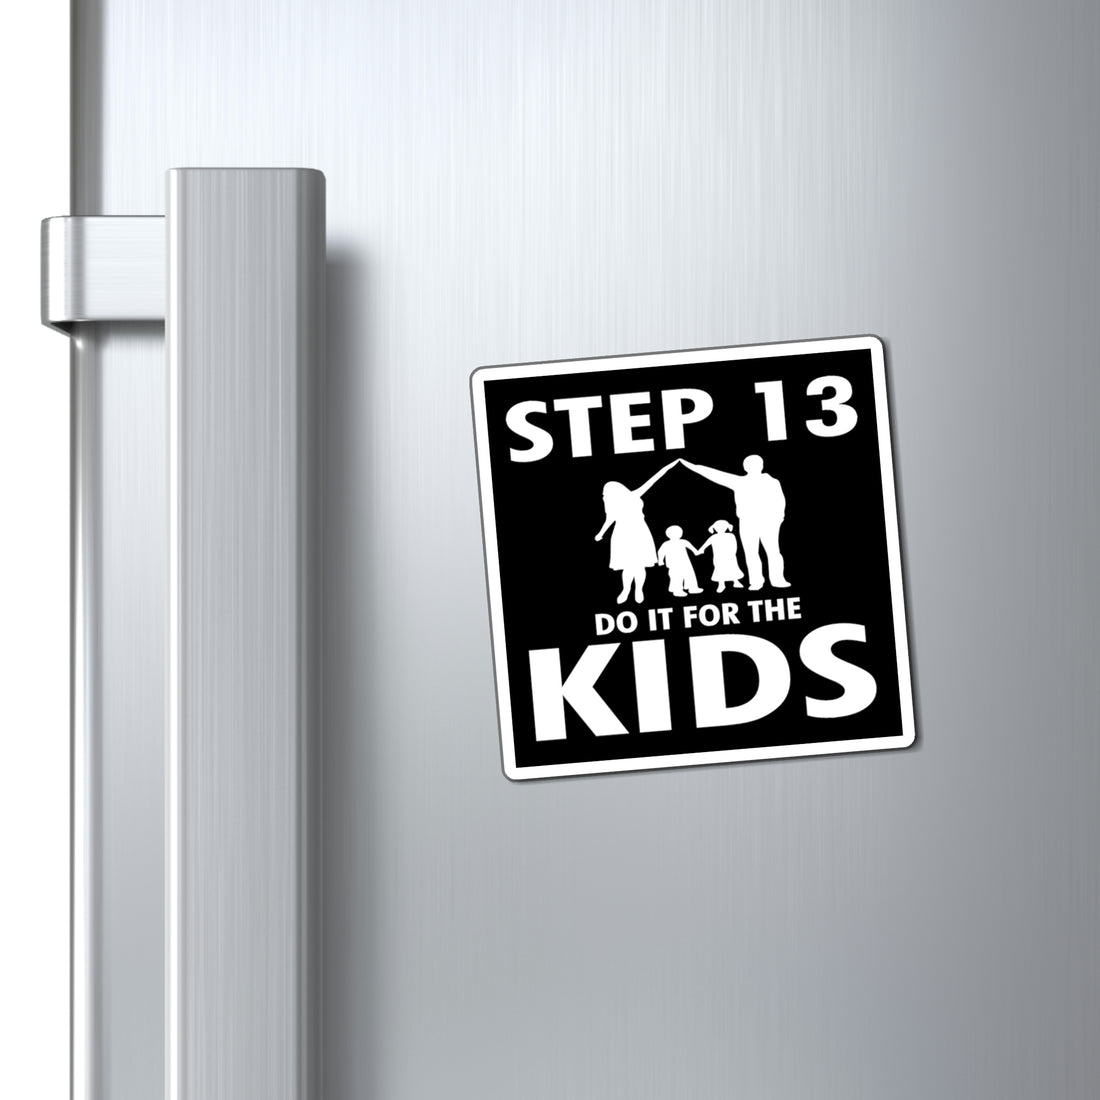 Step 13 Do It For The Kids - Magnet